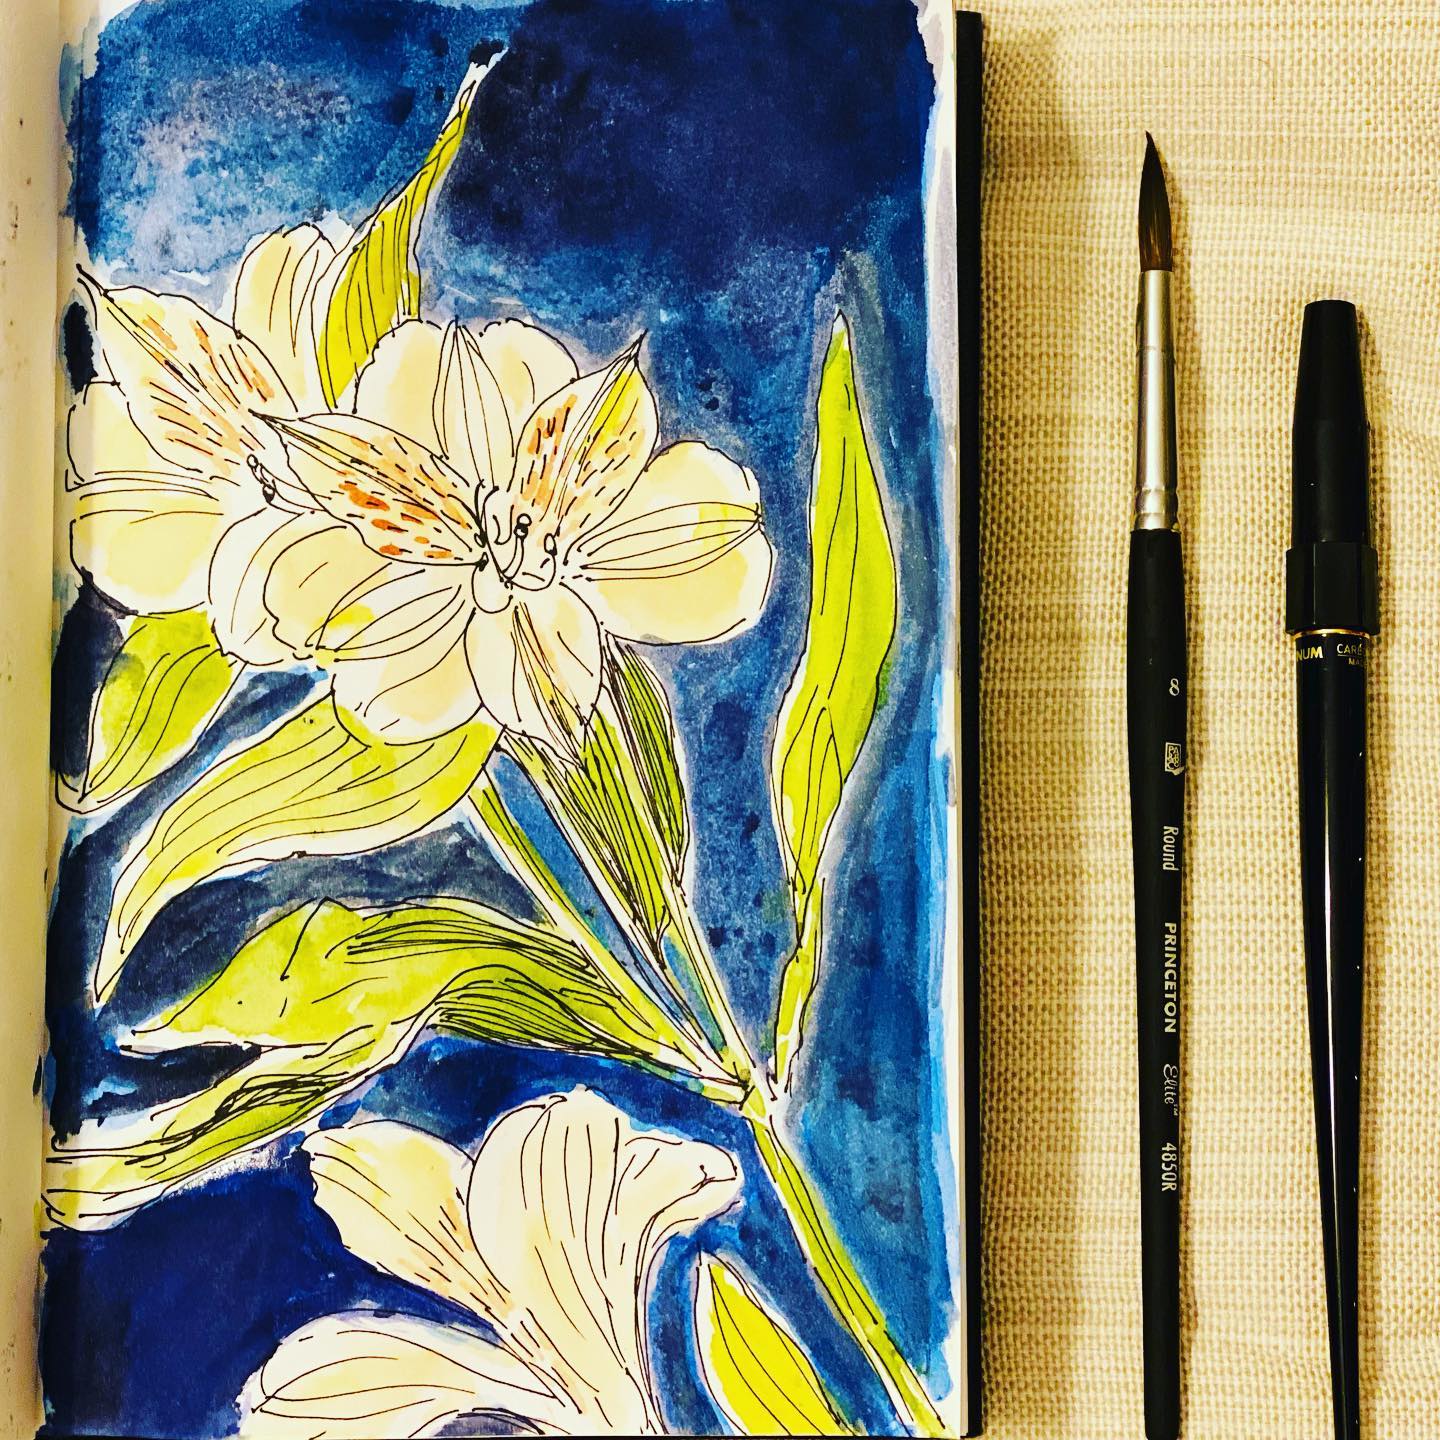 Drawing with the pen and then layering it with a quick watercolor wash is something I am really enjoying these days. It’s spring time and a whole lot of flowers are in full bloom. Wondering what to paint next!